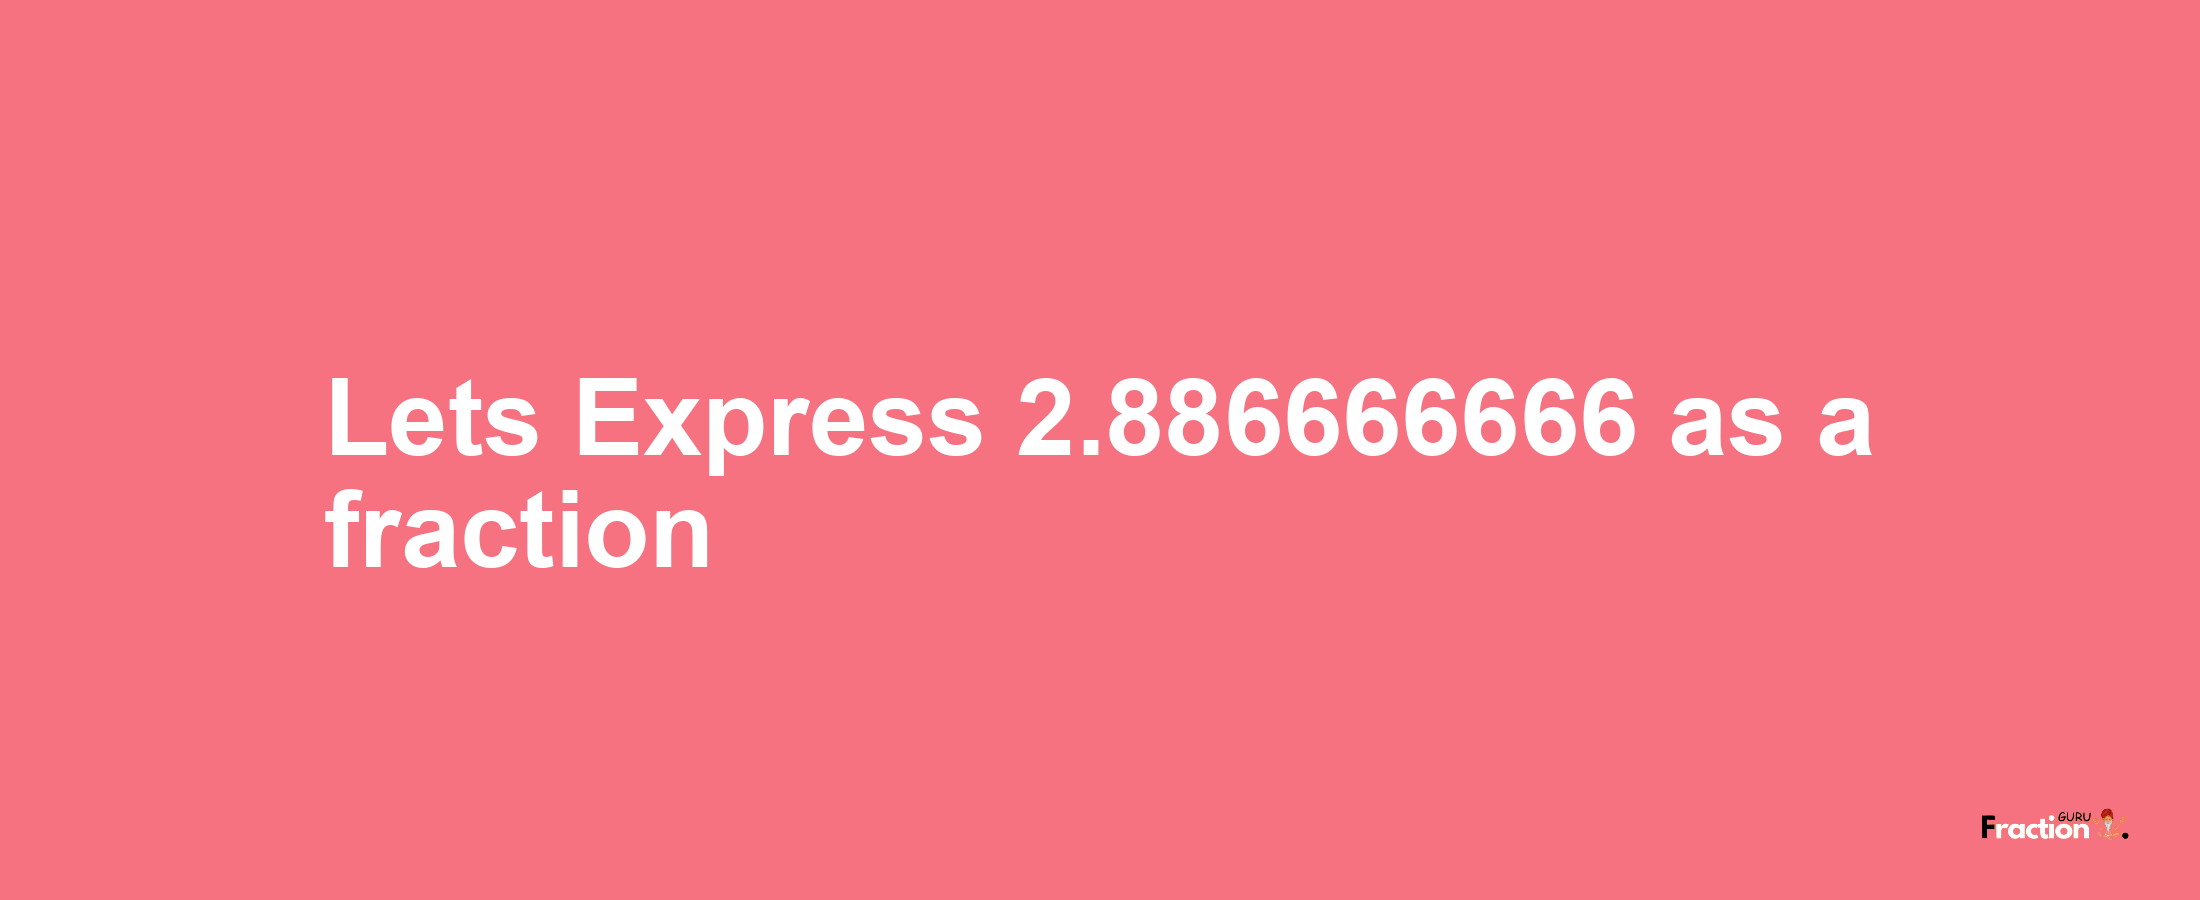 Lets Express 2.886666666 as afraction